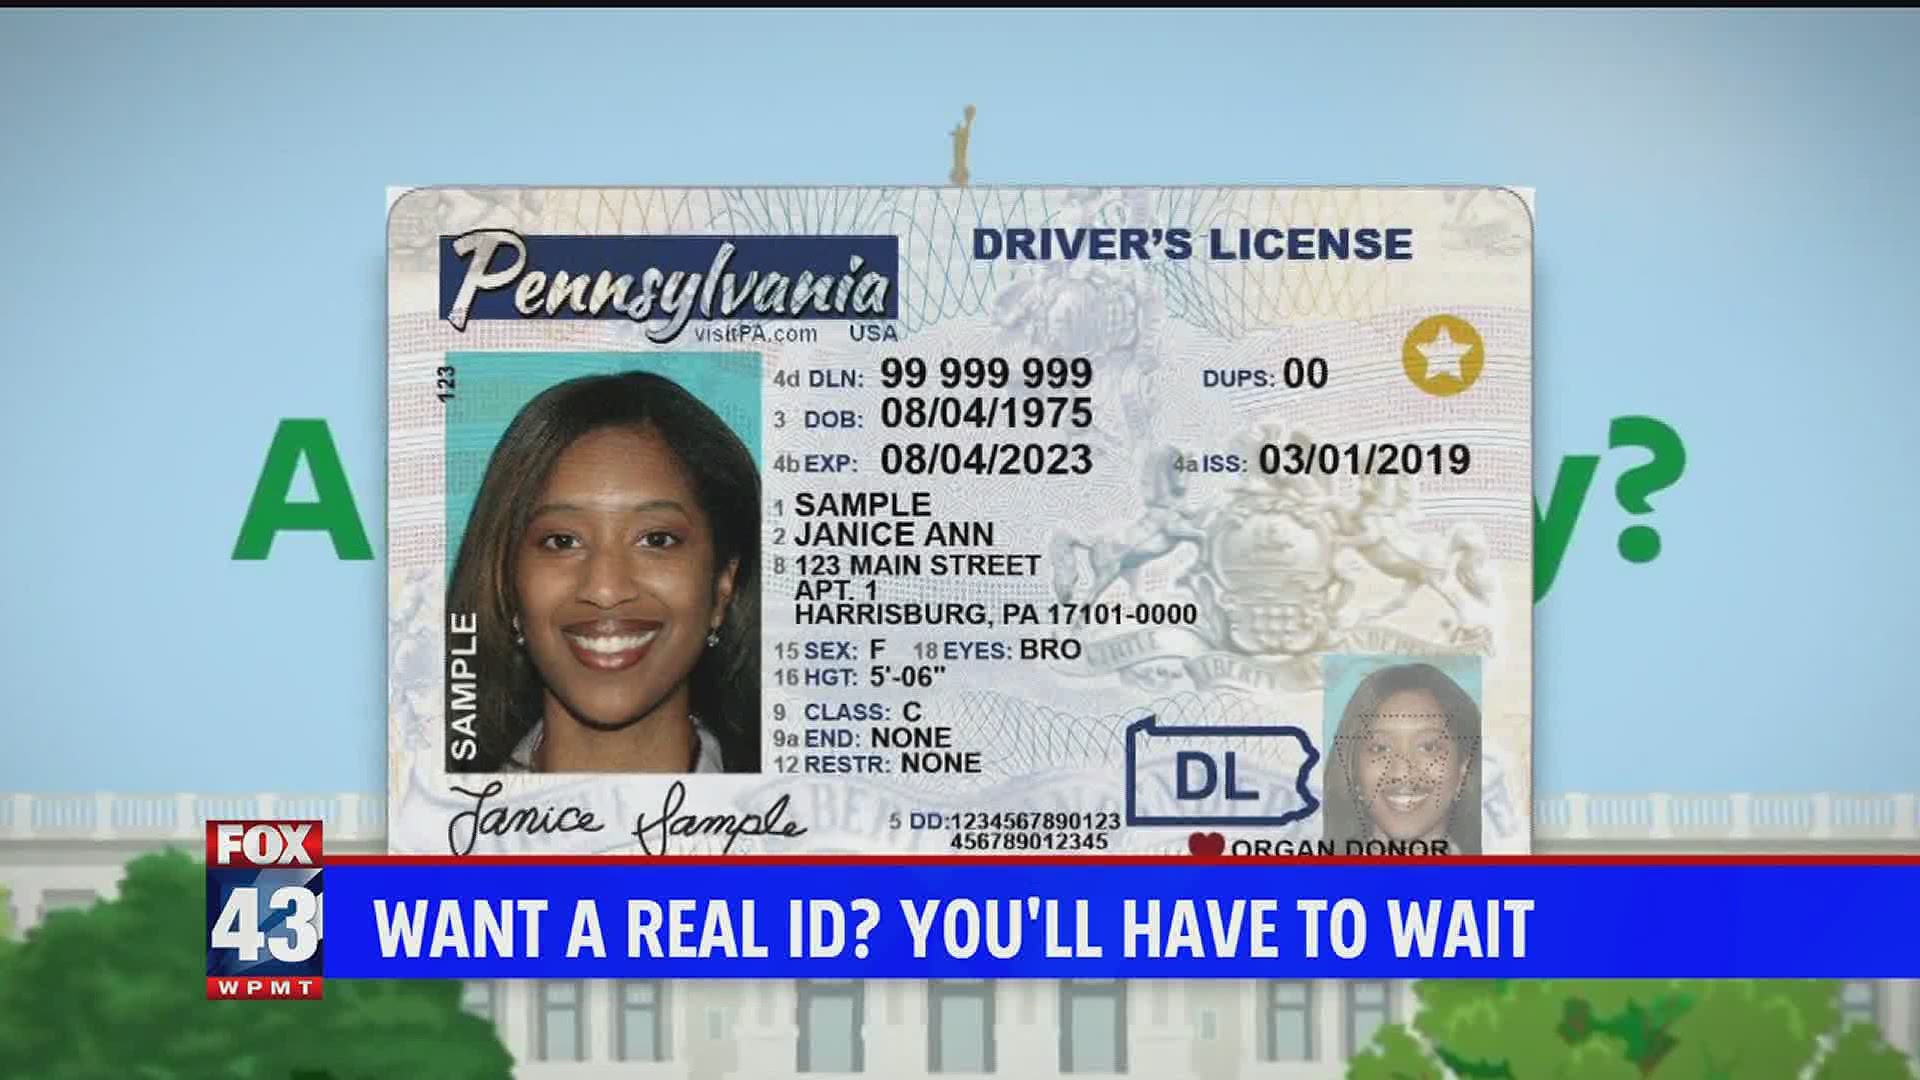 PennDOT has hit pause on new REAL ID cards during COVID-19 mitigation efforts